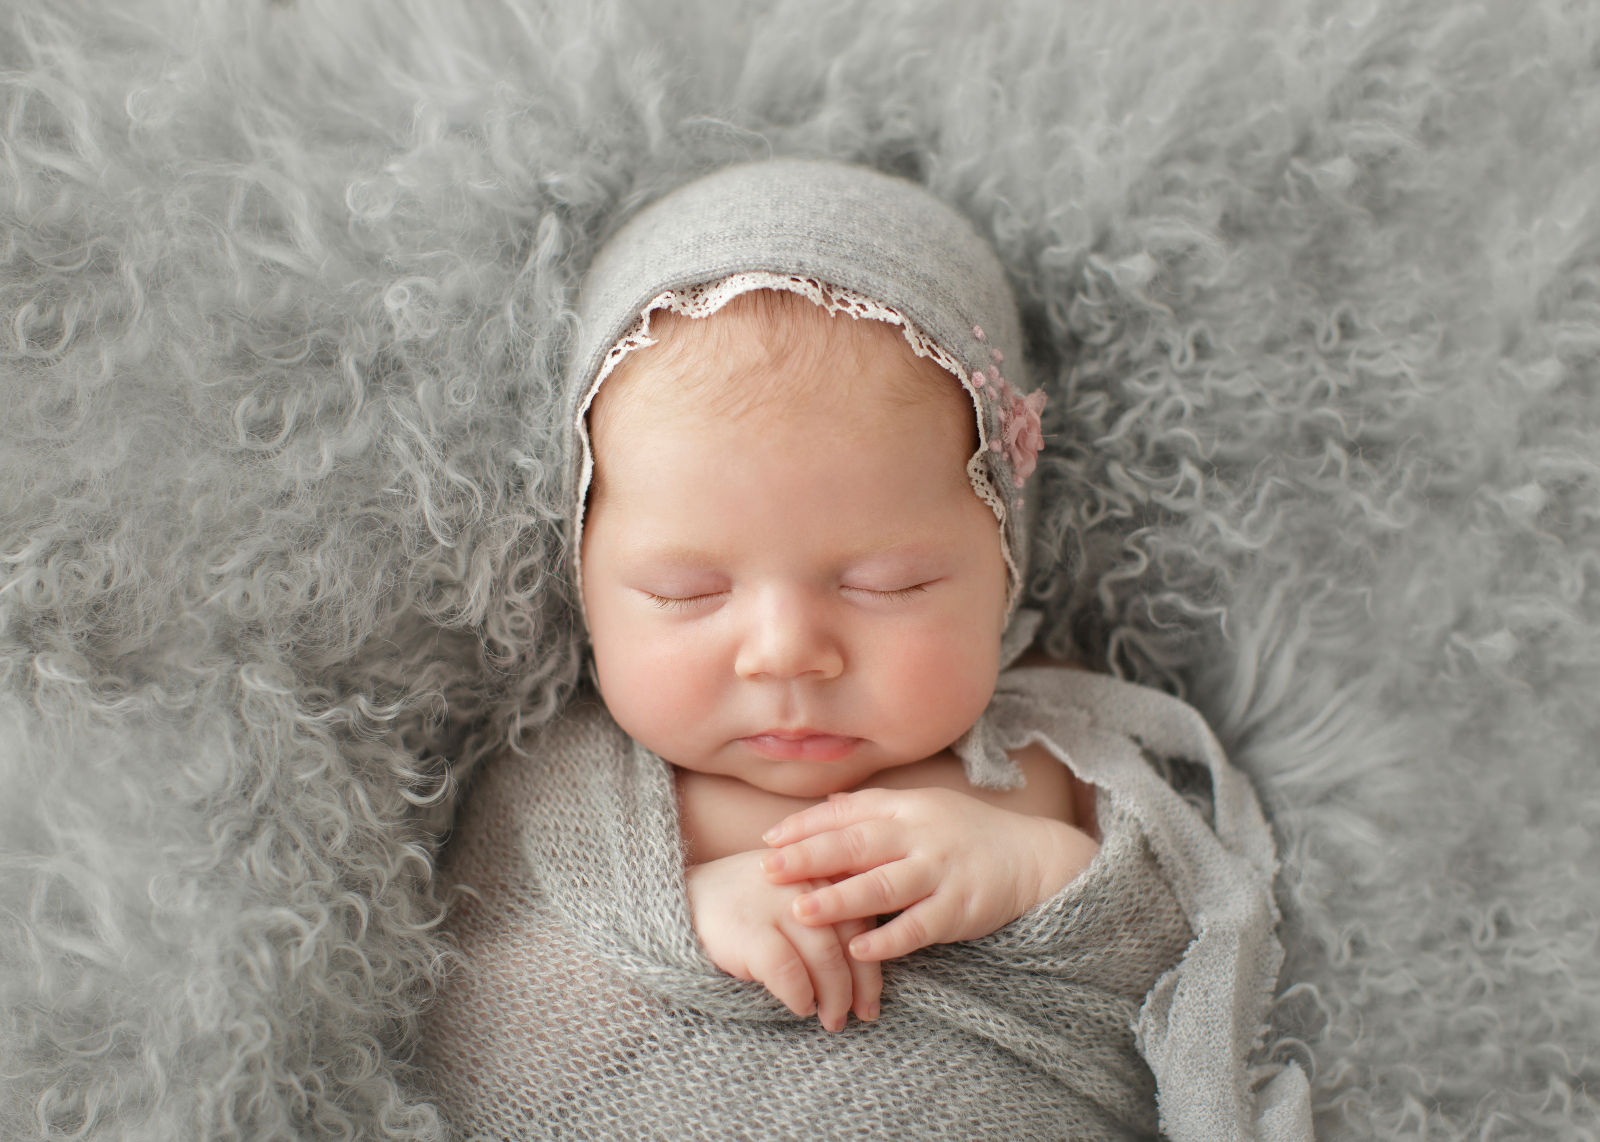 Geelong Baby Photographer | Kristy Notting Photography